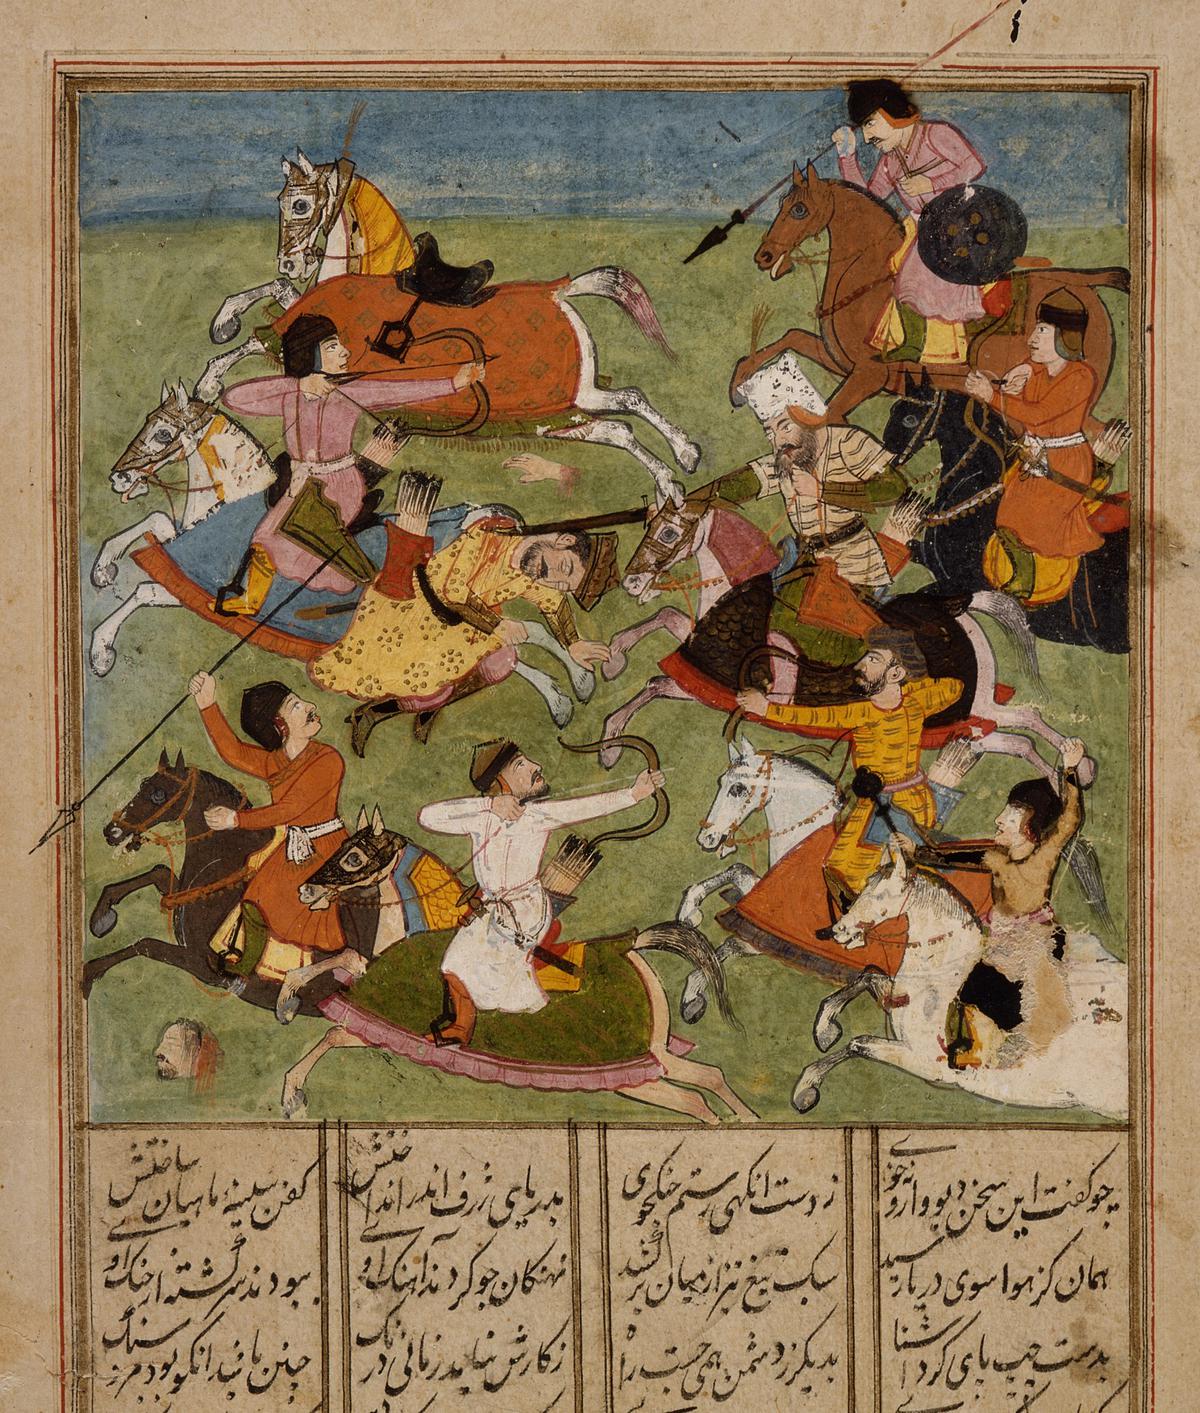 This painting from India at the Los Angeles County Museum of Art depicts a battle scene.